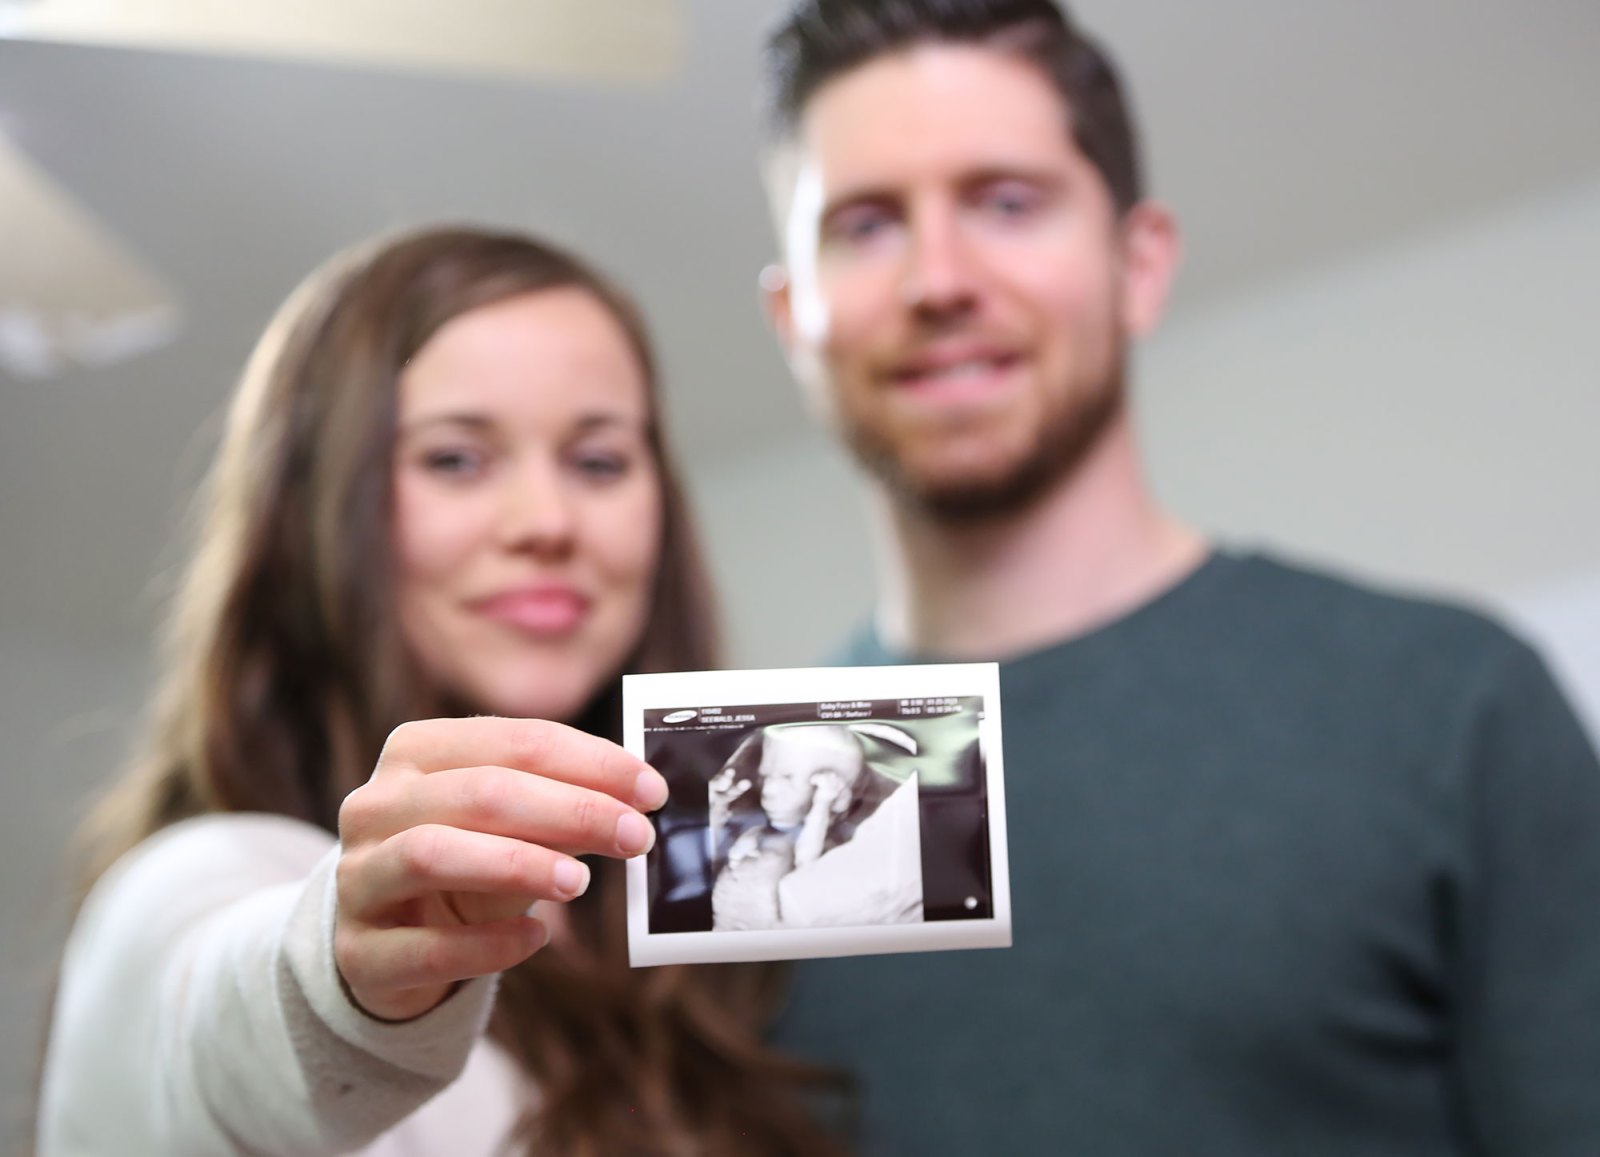 Jessa Duggar Is Pregnant, Expecting 4th Baby With Ben Seewald